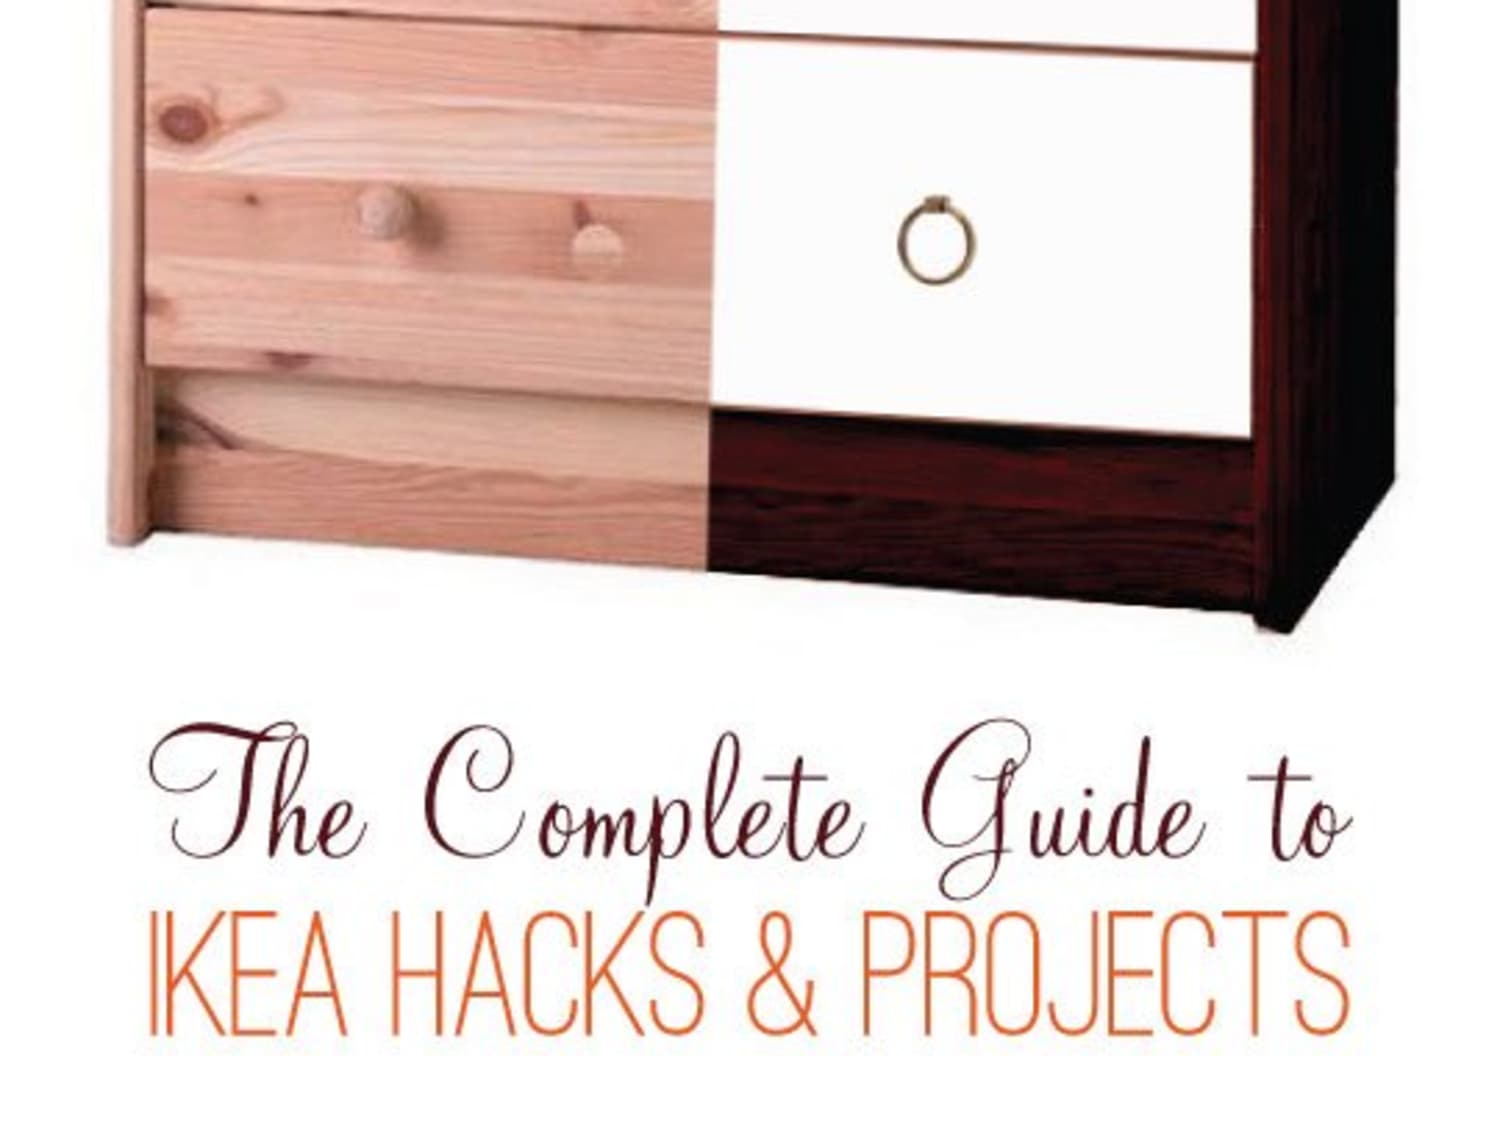 Make It Work The Complete Guide To Ikea Hacks Projects